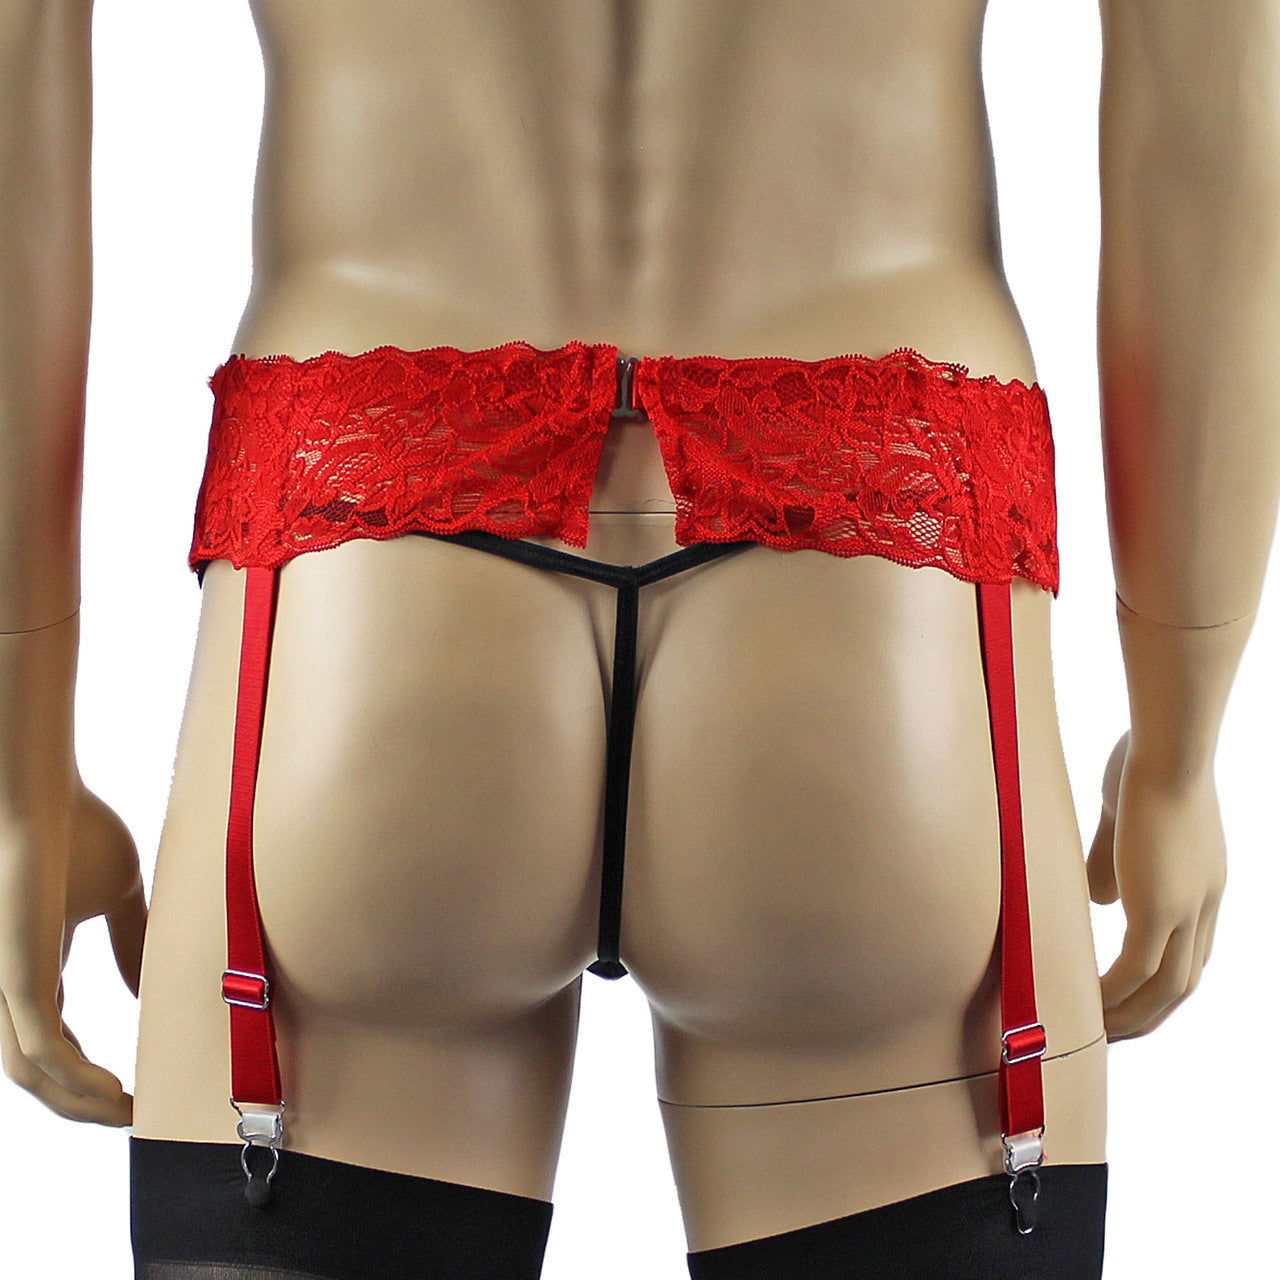 Mens Lace Garter Belt Mens Lingerie and Underwear (red plus other colours)